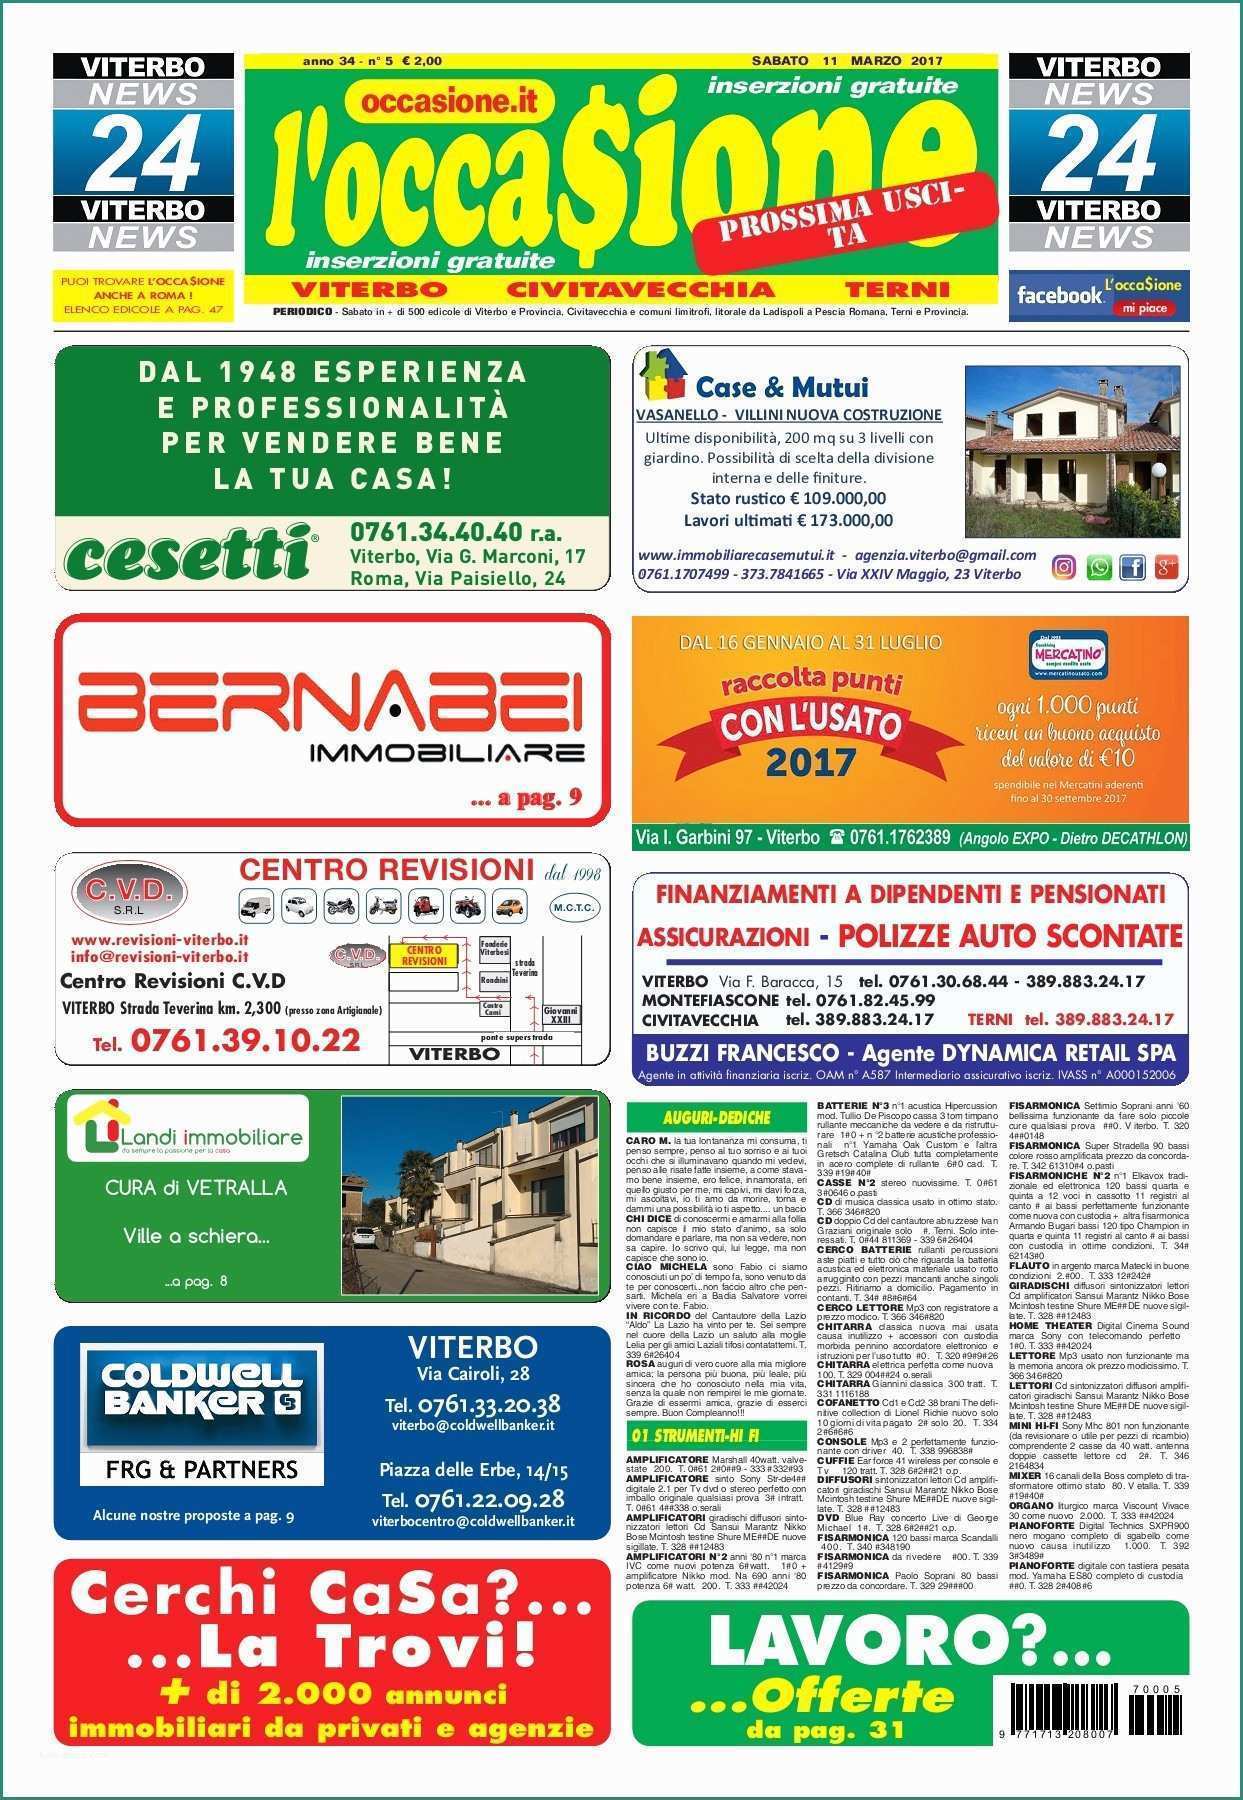 Simboli Lavatrice Indesit E L Occa$ione N 5 11 25 Marzo Pages 1 48 Text Version